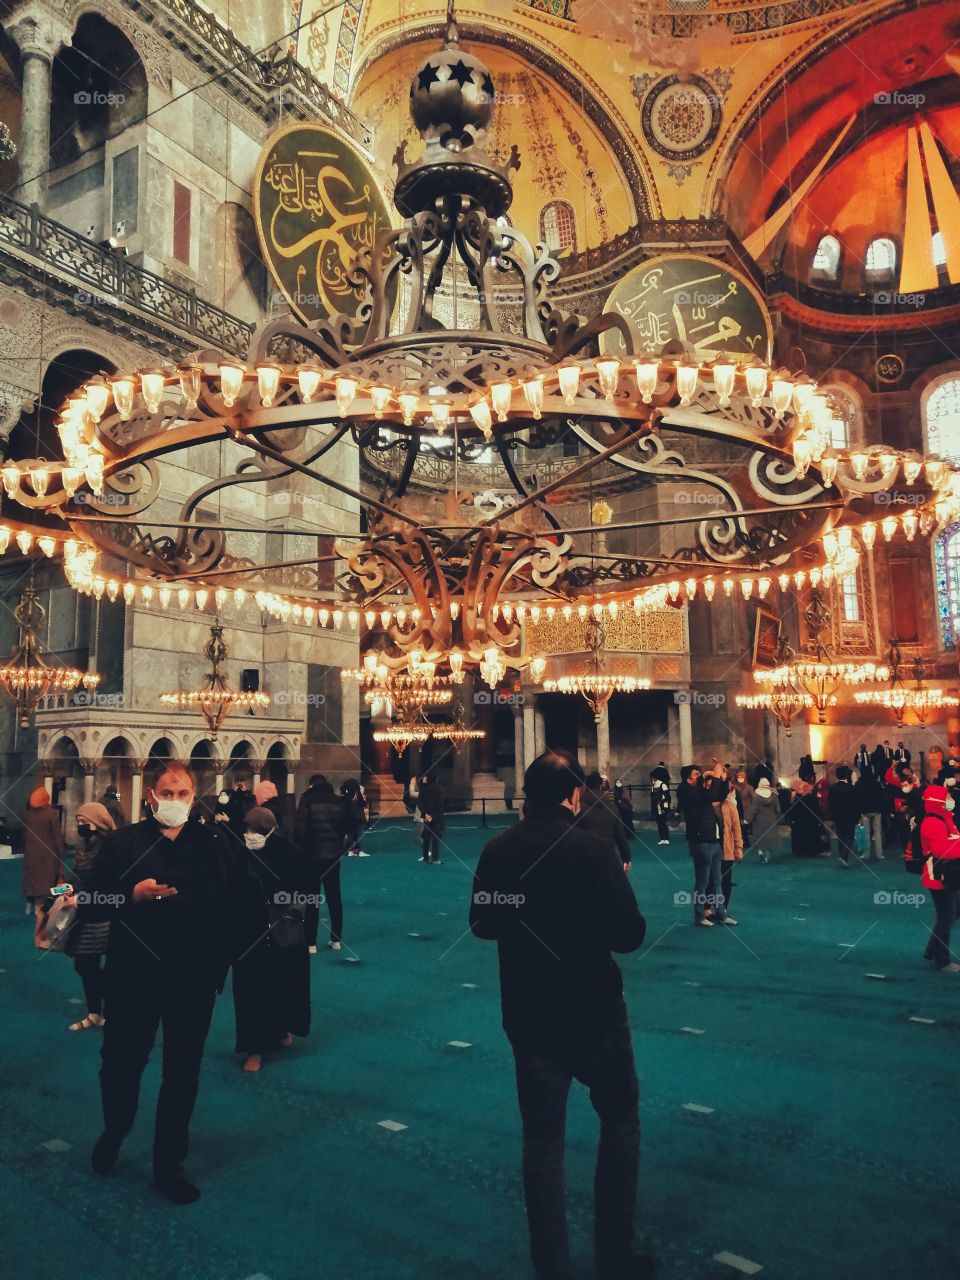 Mosque in İstanbul is so good.